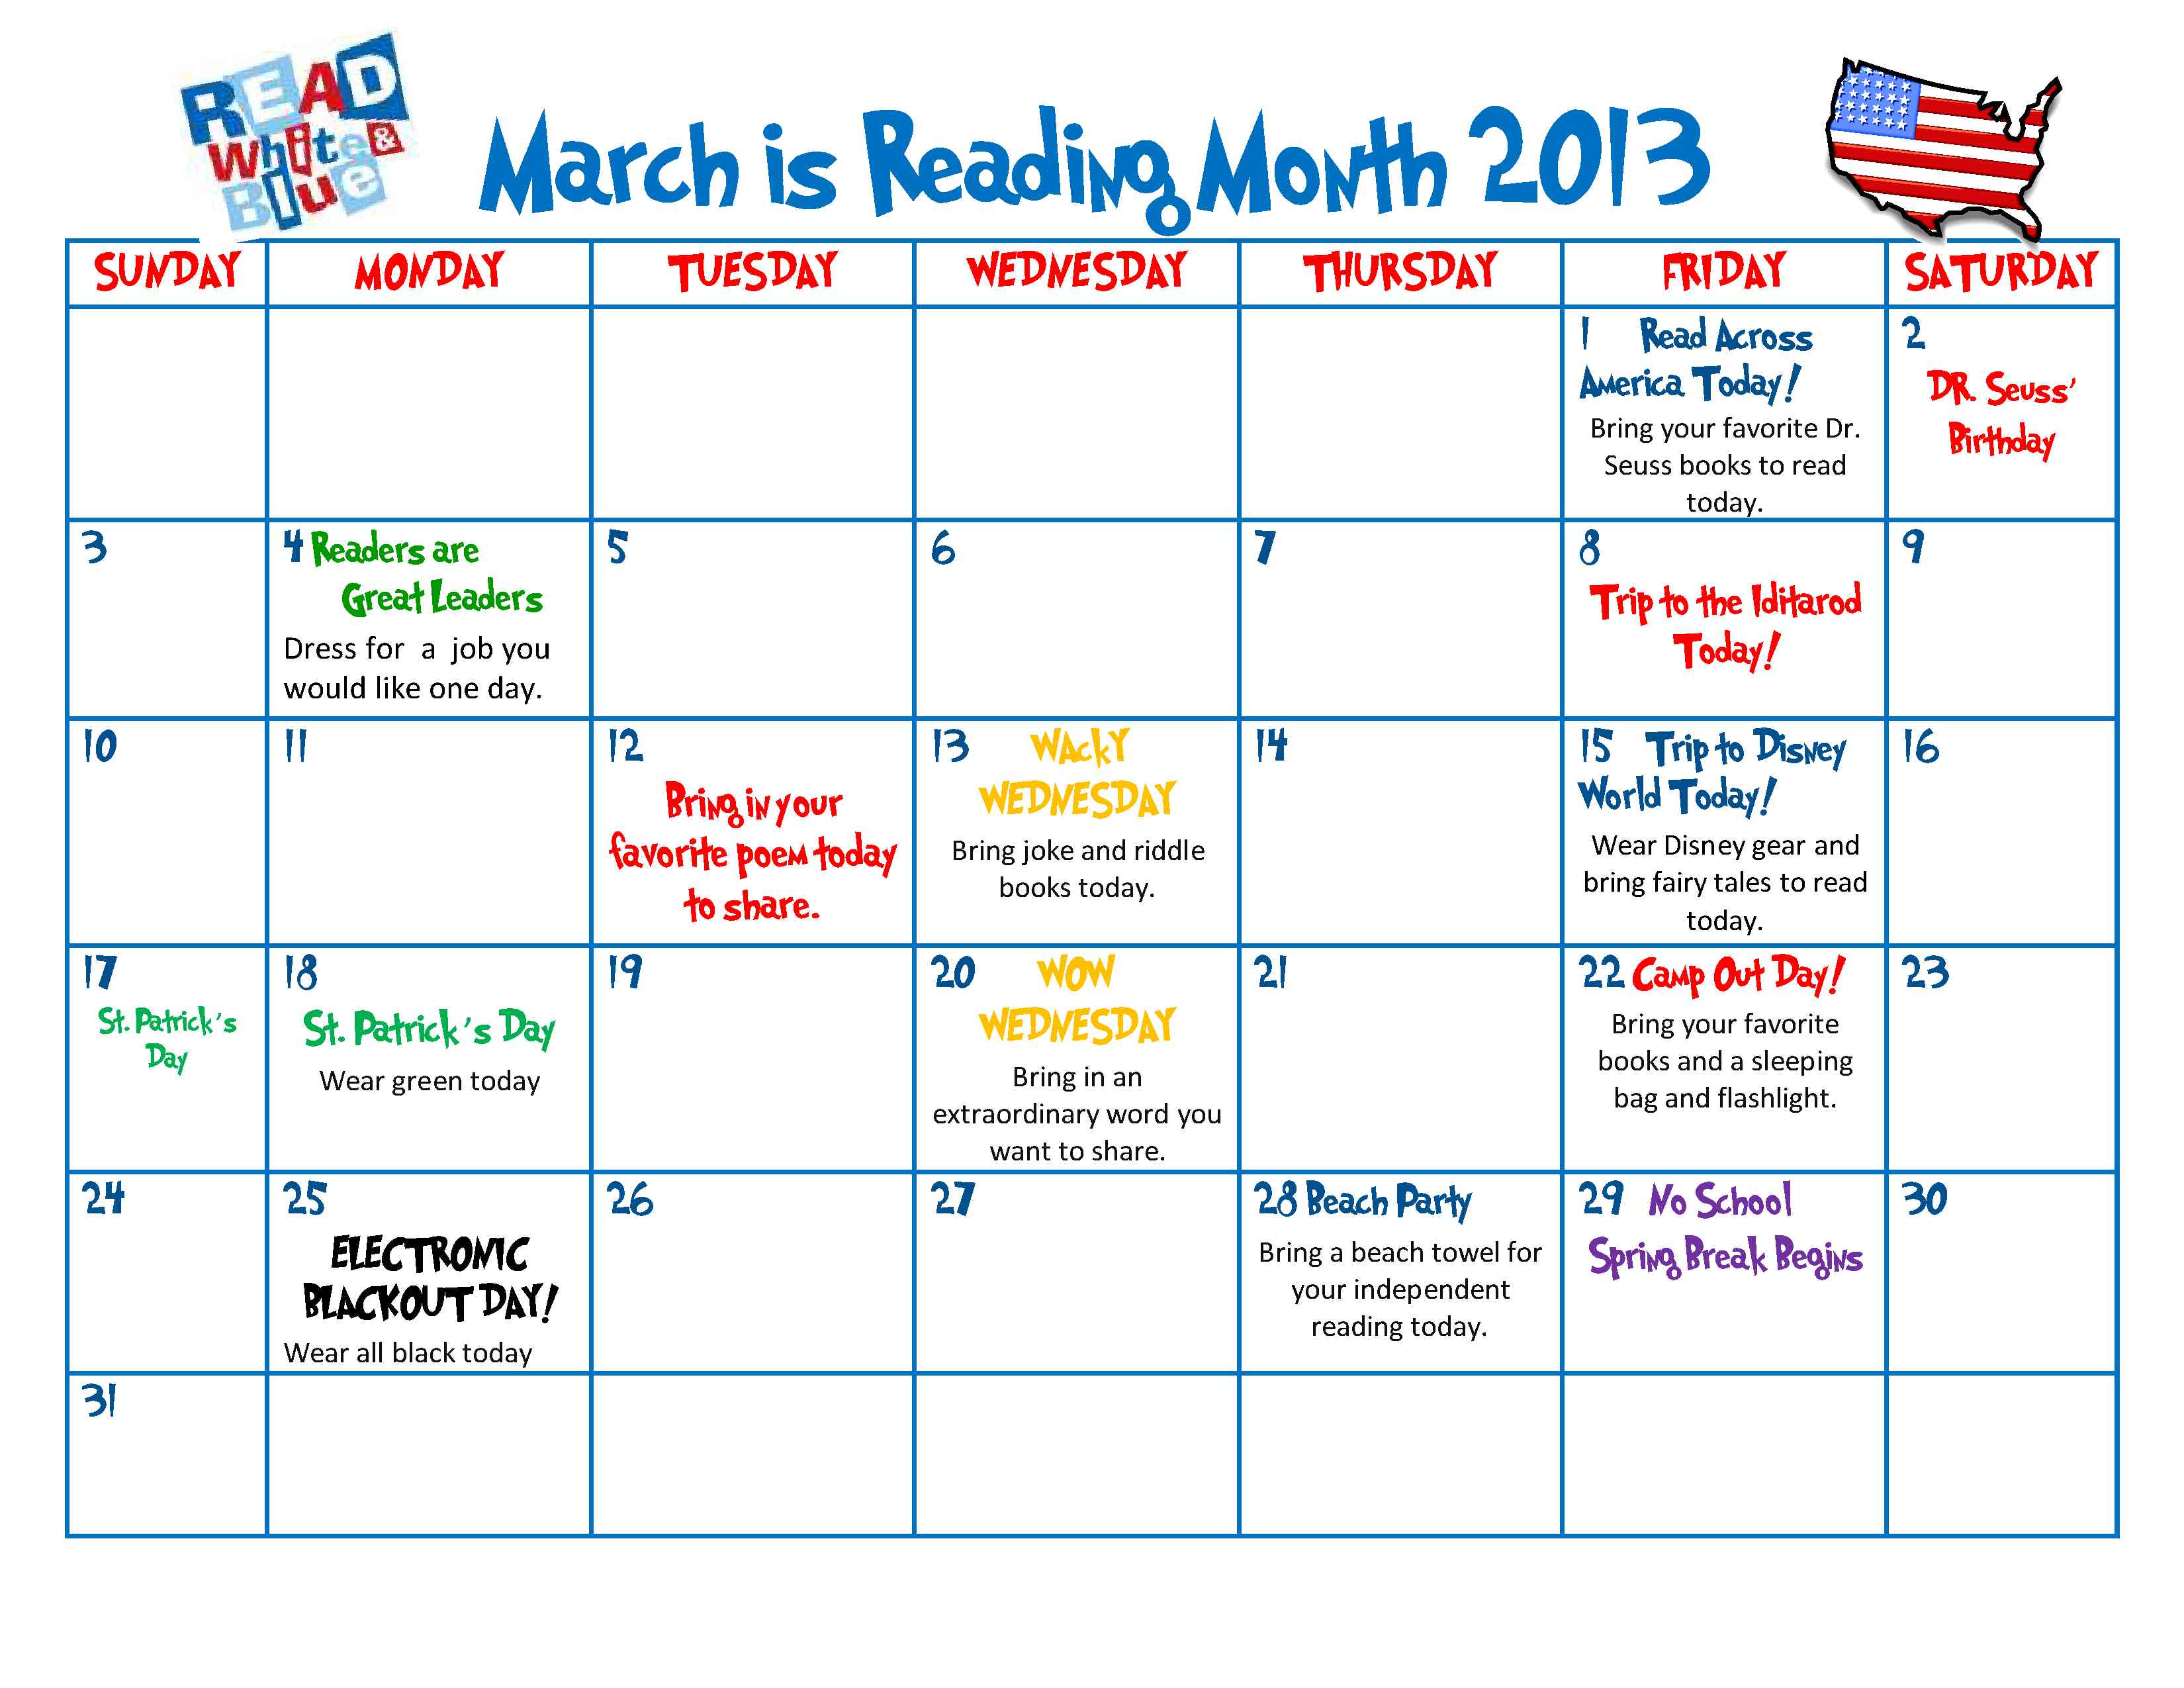 Celebrate the Joy of Reading All Month Long | Scholastic